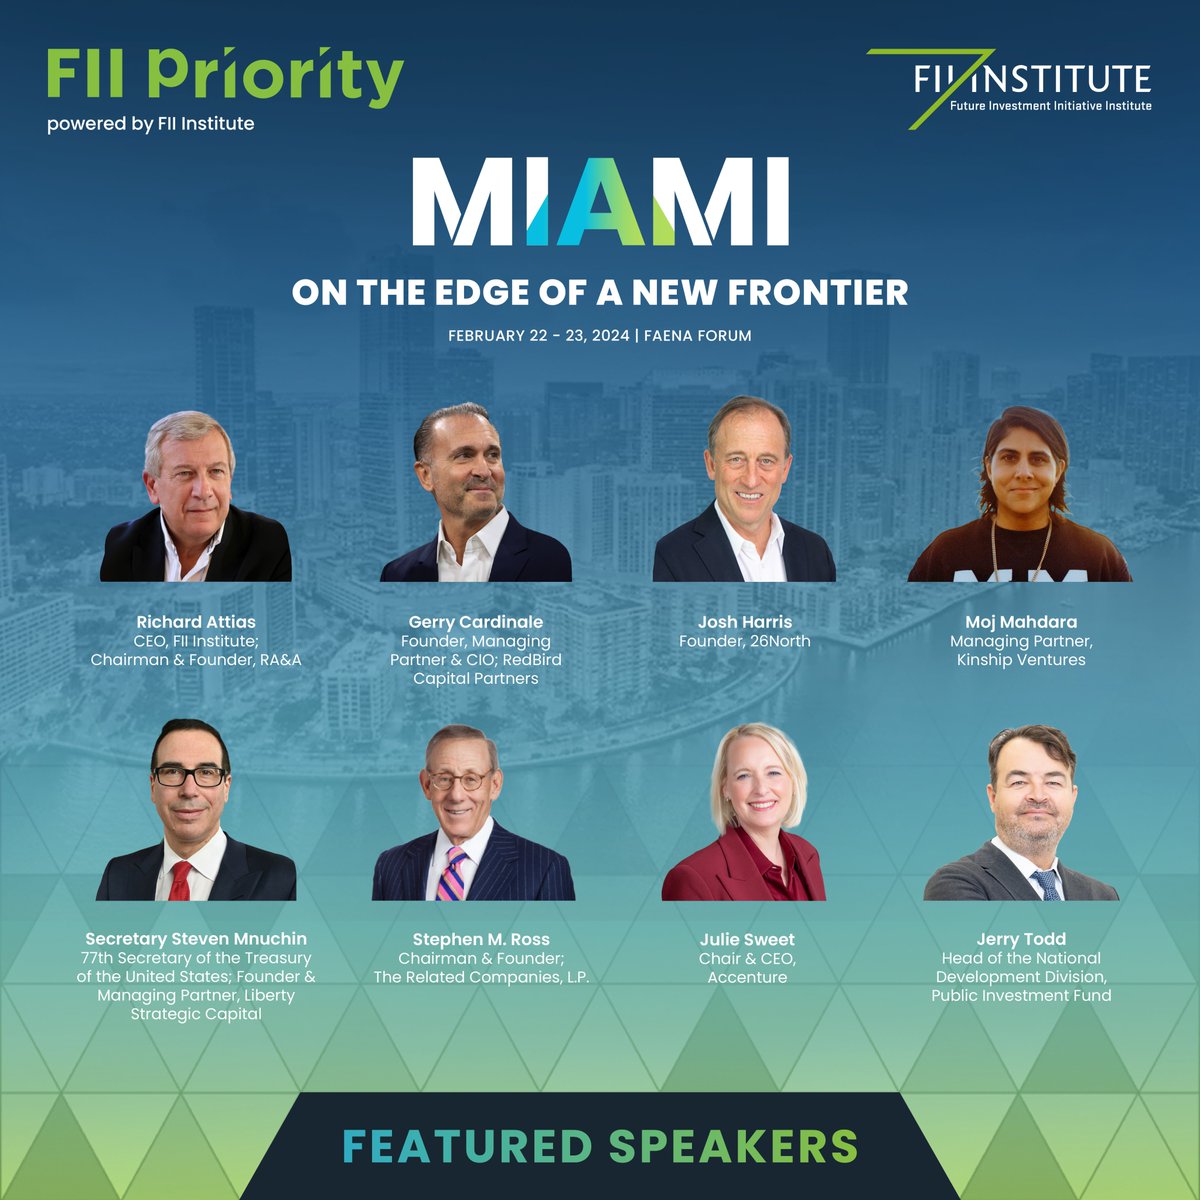 Showcasing our next unparalleled collective of experts, leaders, and visionaries for #FIIPRIORITY #Miami. Get ready to tune in to their insights from Feb 22-23, 2024 as deliberate on innovative ideas to confront humanity's biggest challenges: bit.ly/FIIP2_Miami